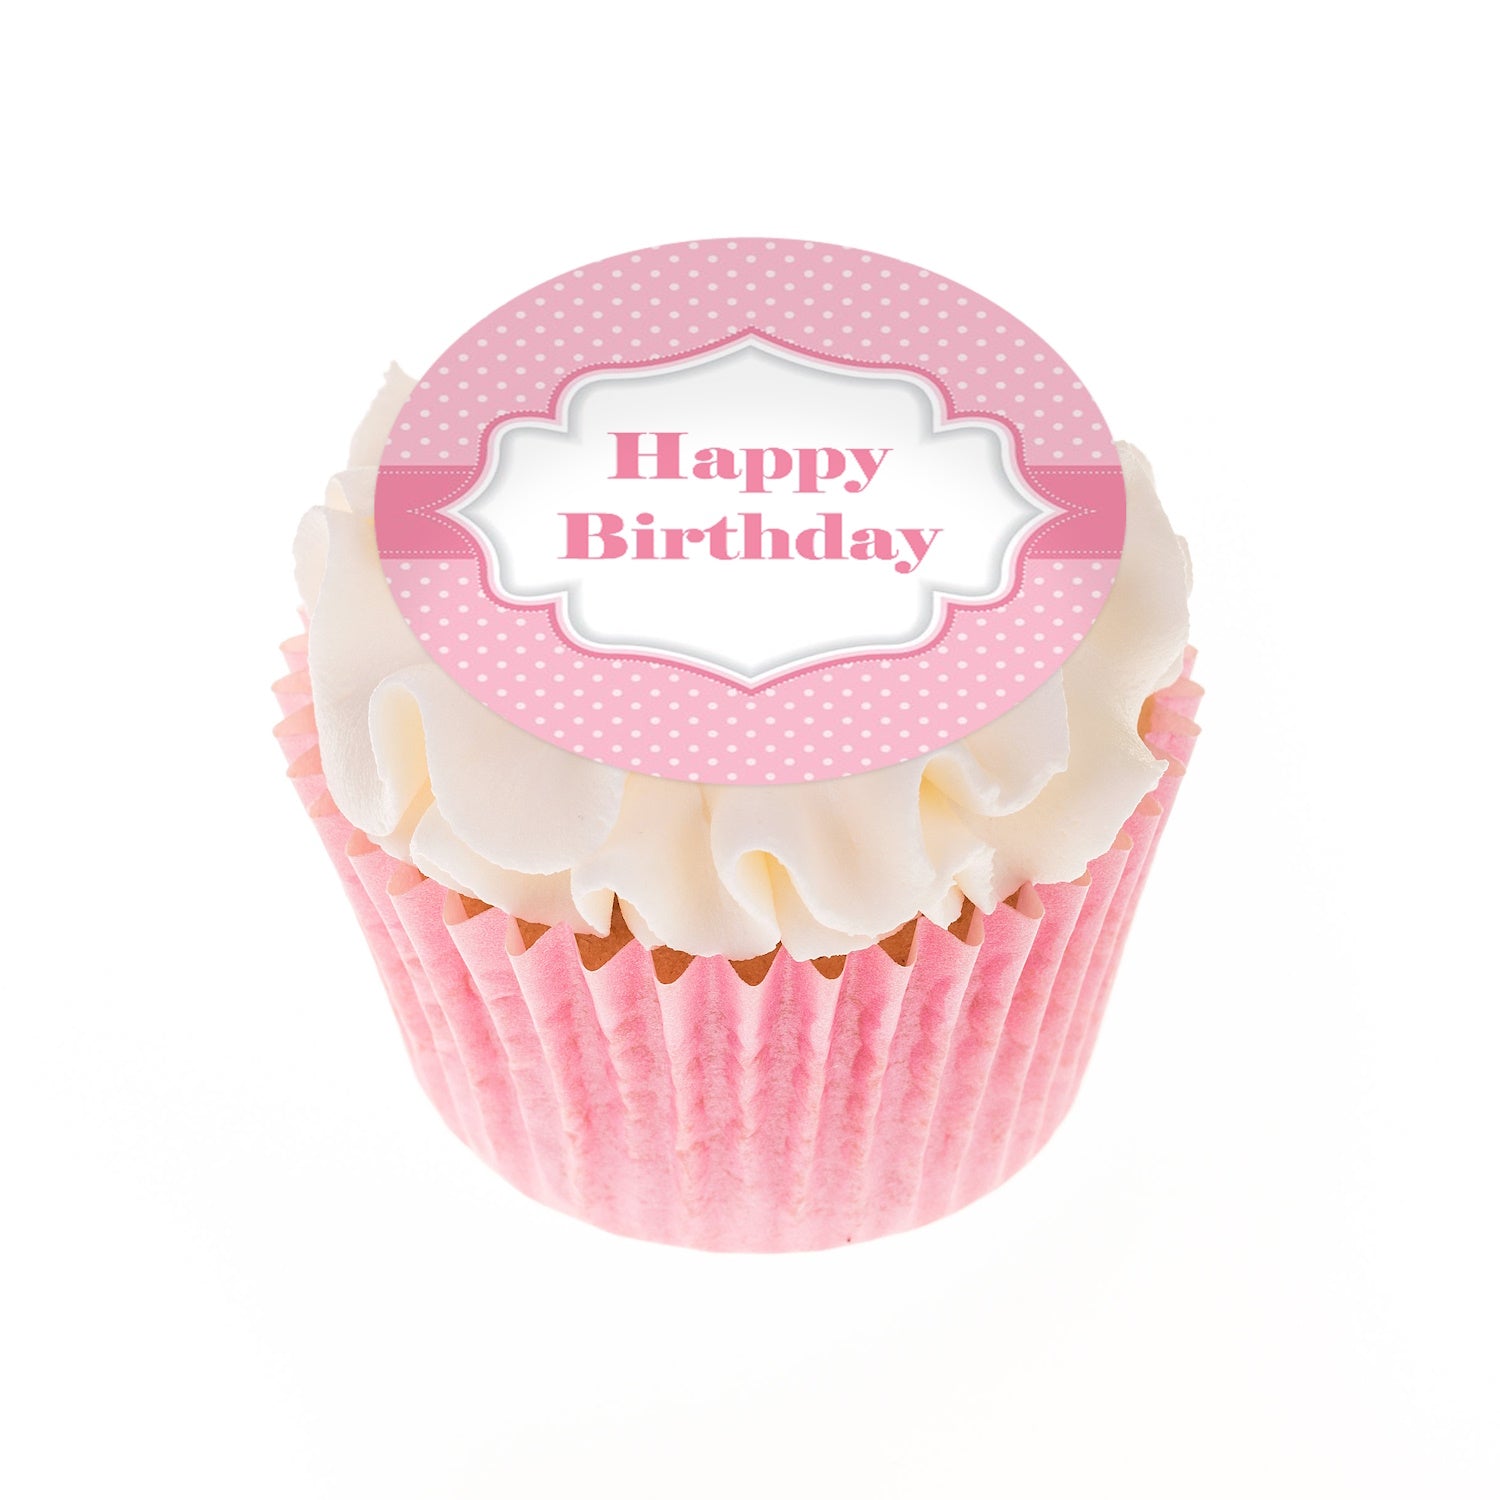 Edible Happy Birthday cupcake toppers